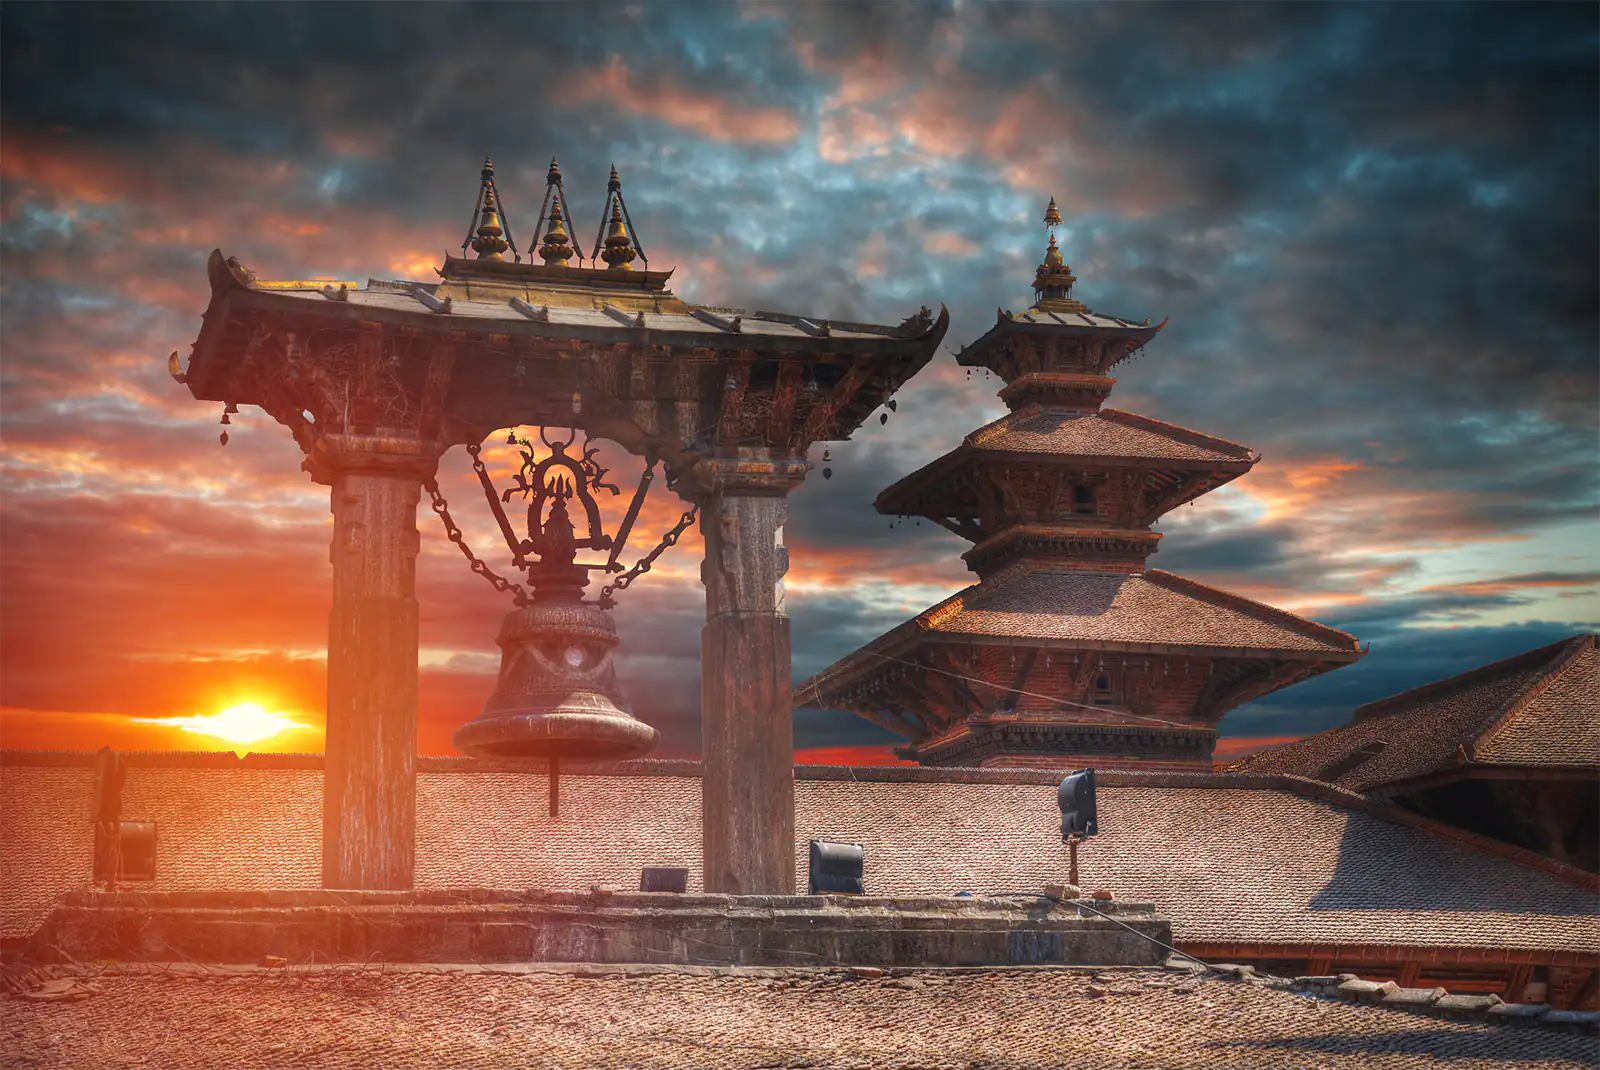 Bhaktapur is an ancient Newar city to the east of the capital of Nepal - the city of Kathmandu